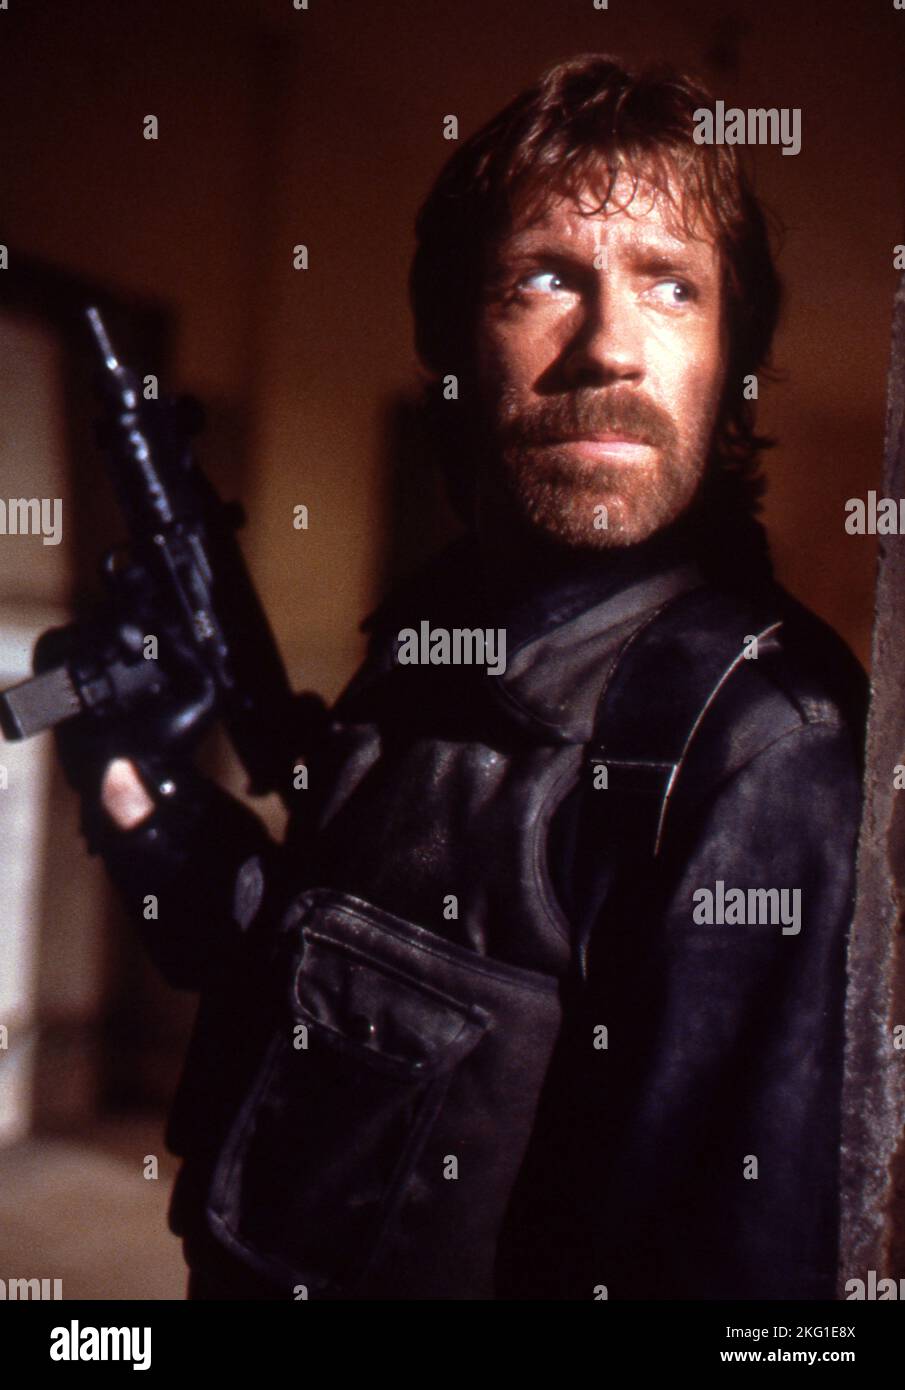 CHUCK NORRIS in THE DELTA FORCE (1986), directed by MENAHEM GOLAN. Credit: CANNON FILMS / Album Stock Photo